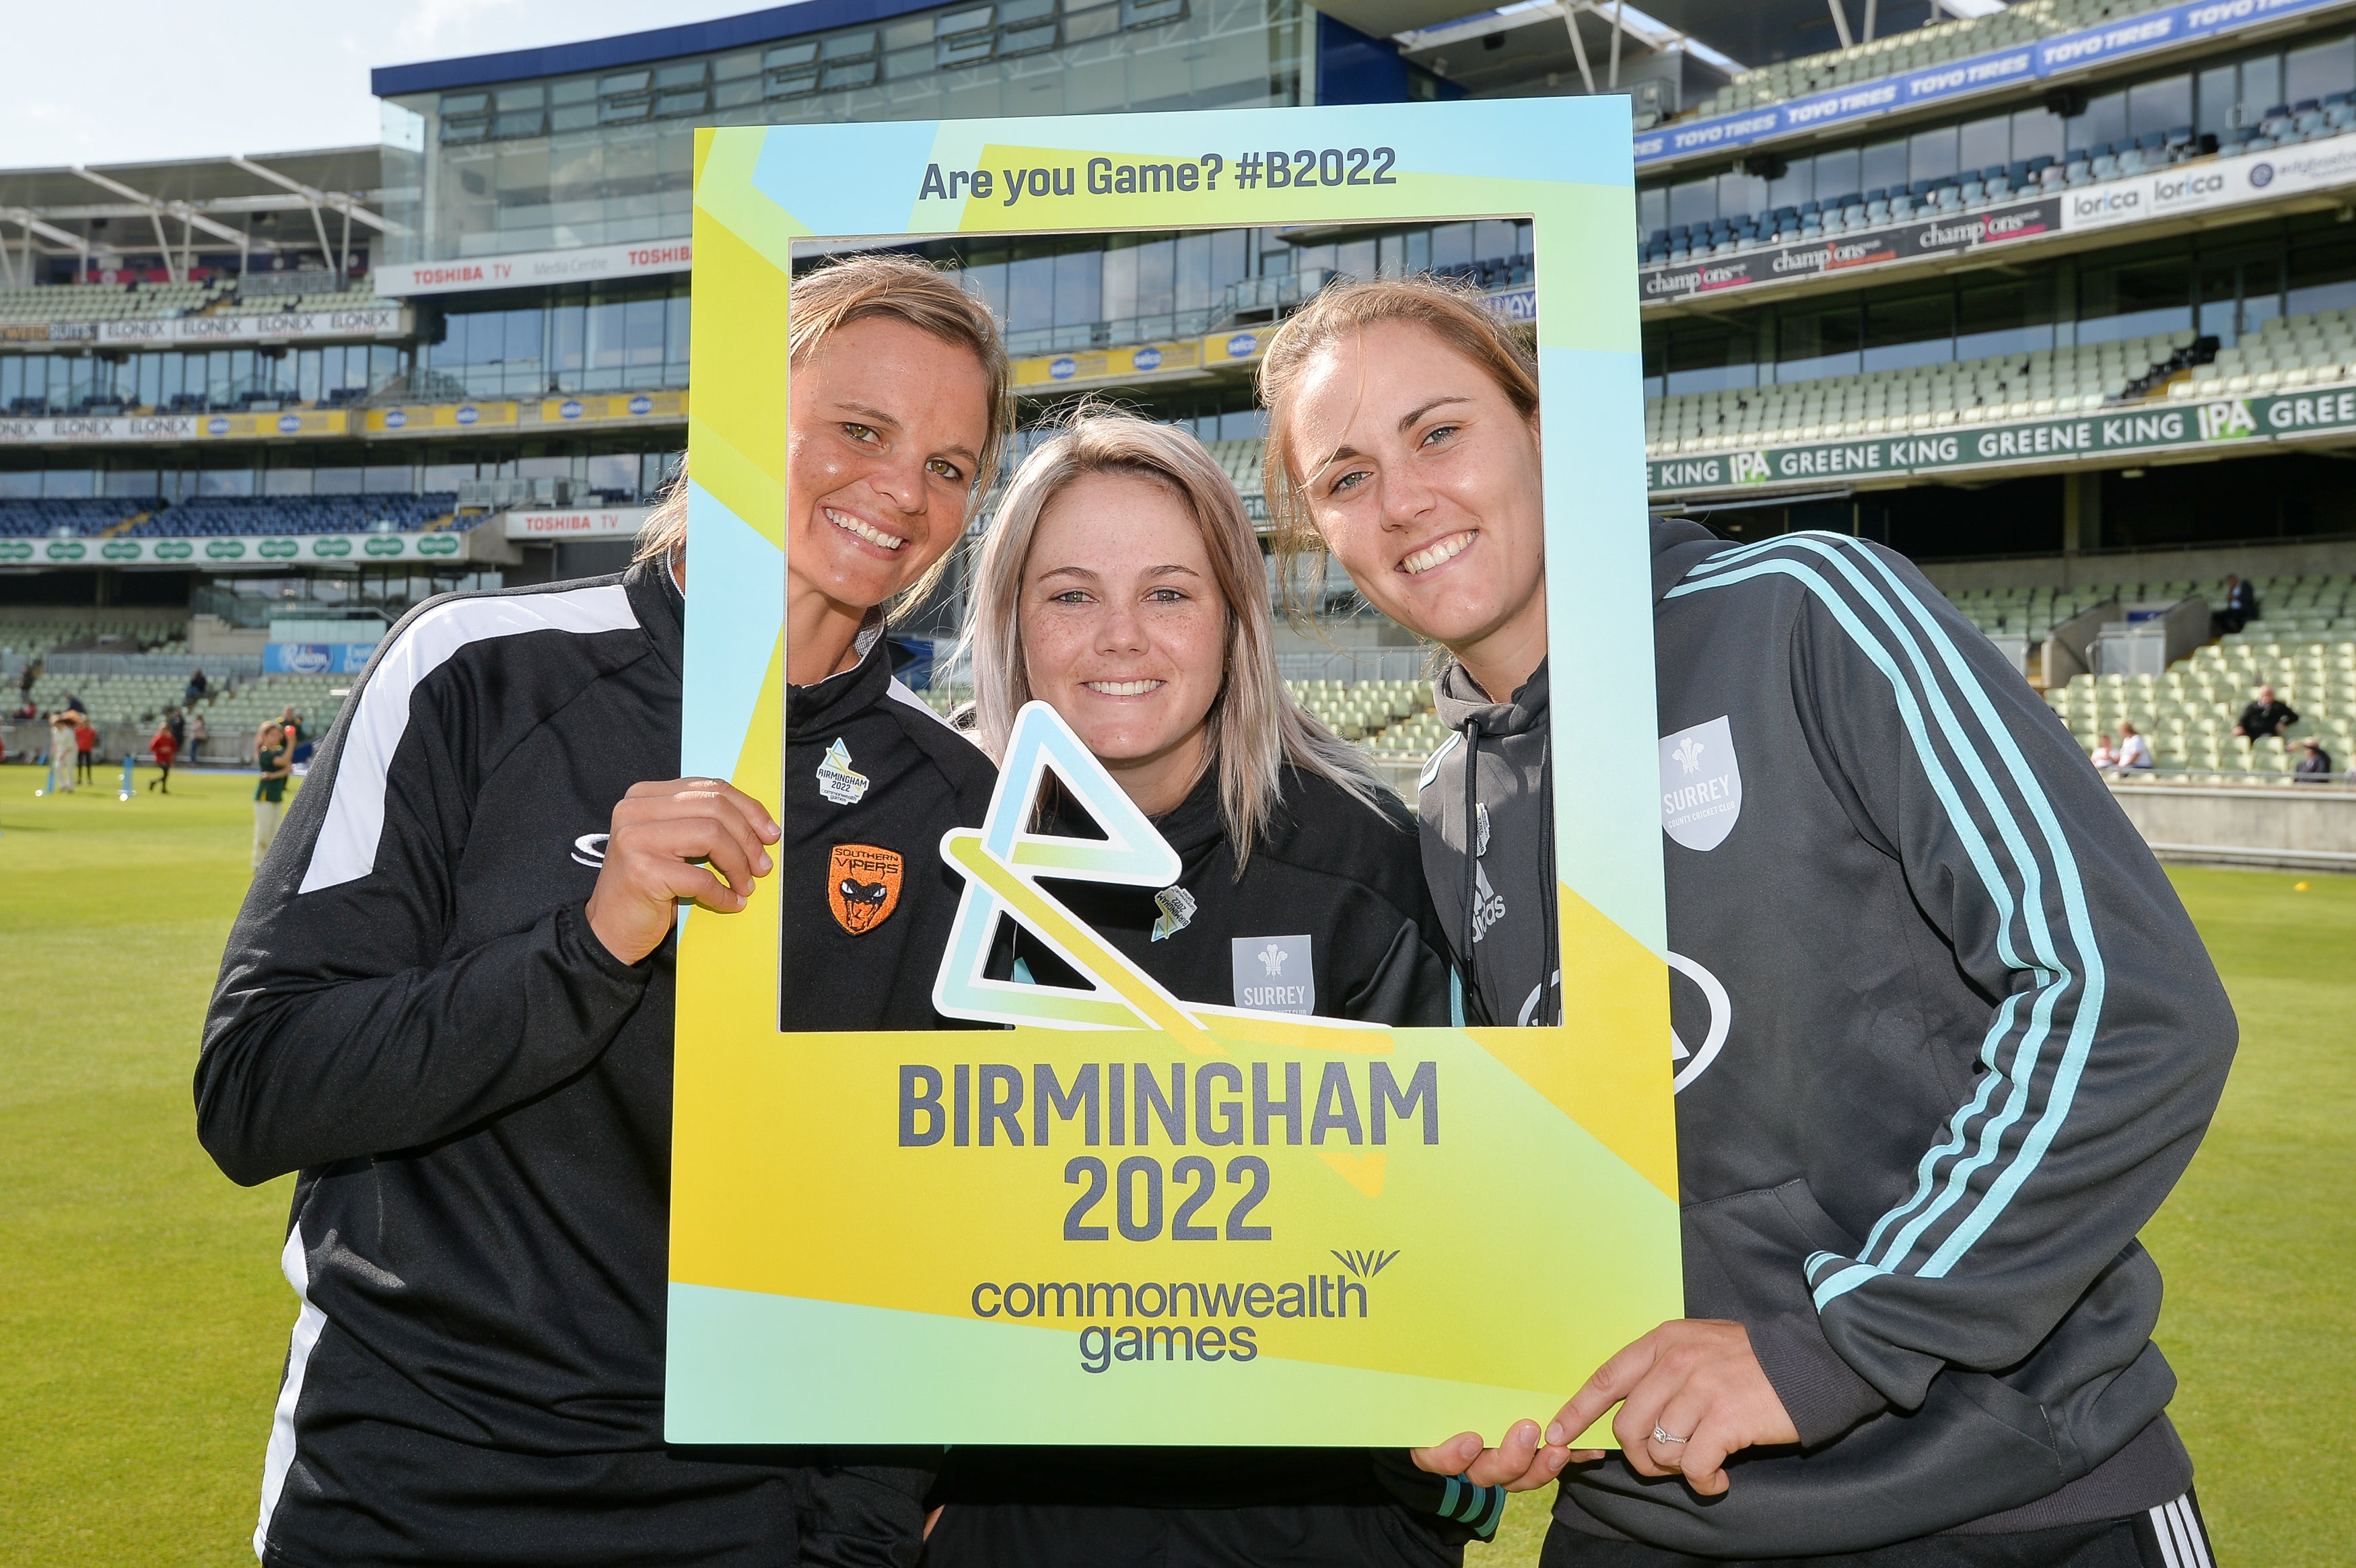 Women’s cricket will feature at Birmingham 2022 (Jacob King/PA)